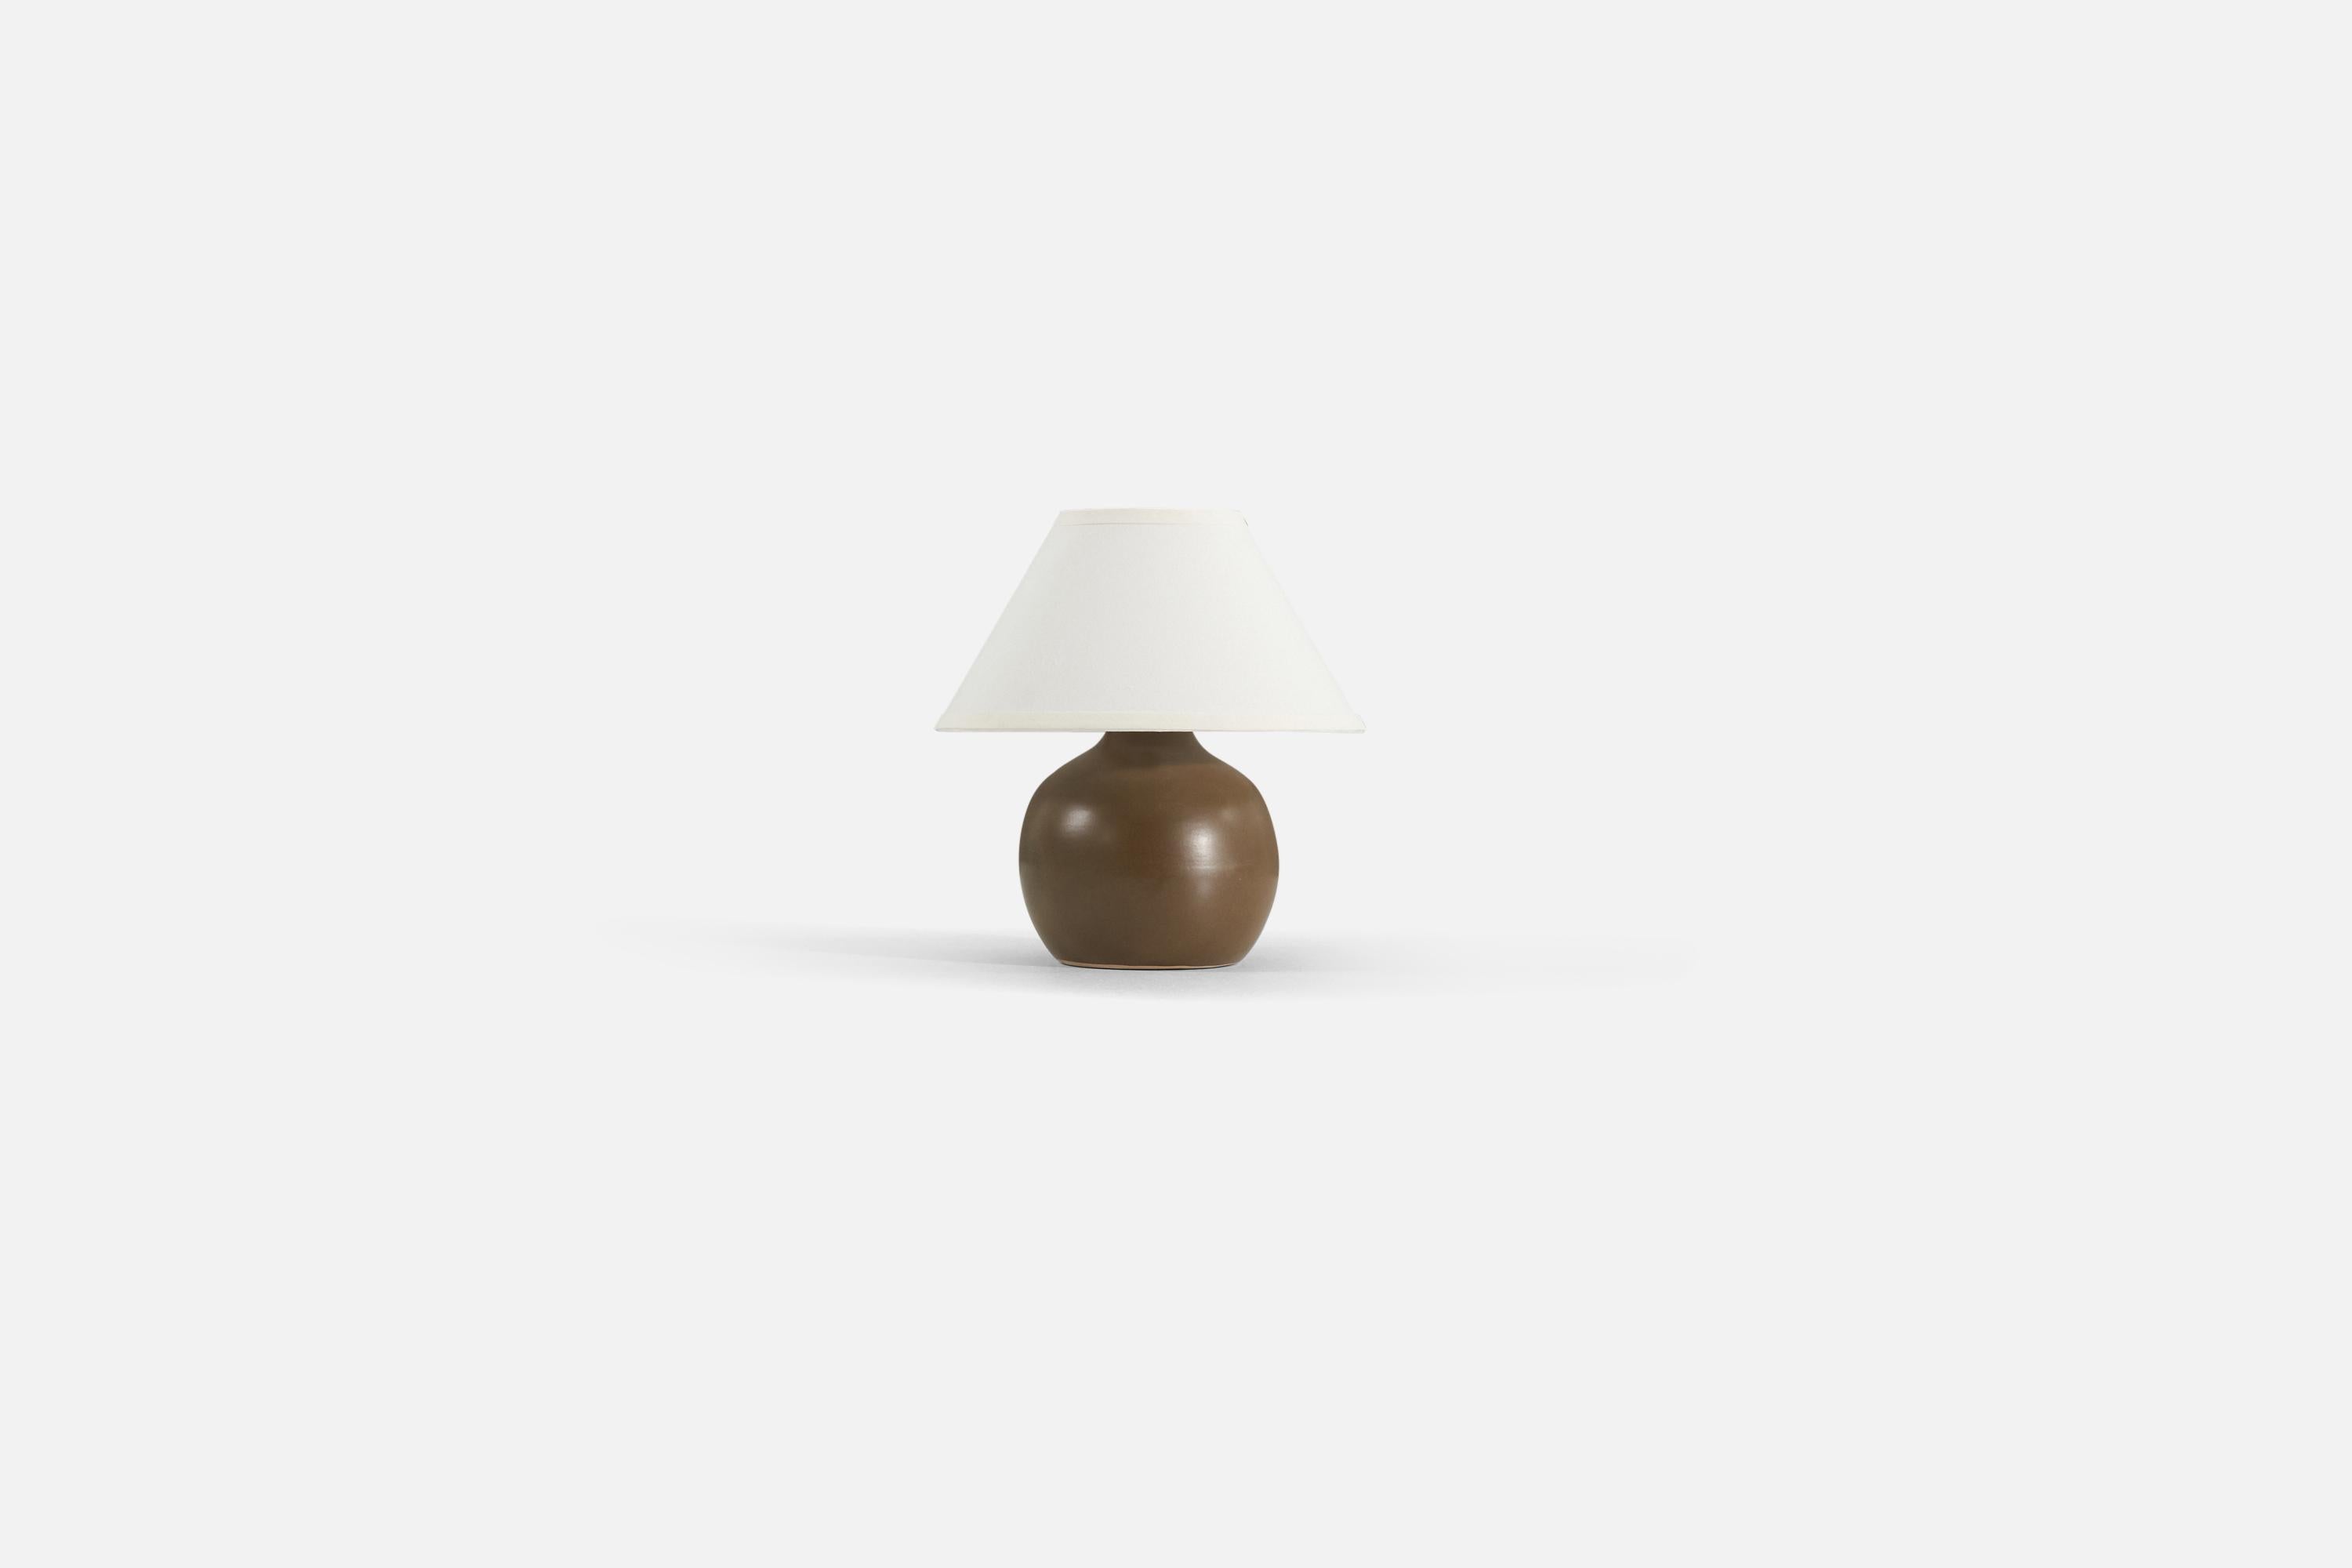 A brown table lamp designed by husband and wife duo Jane & Gordon Martz. Produced by Marshall Studios, Veedersburg, Indiana.

The base is slip-cast and then dipped into glaze. The base is signed. 

Sold without lampshades. Dimensions in listing